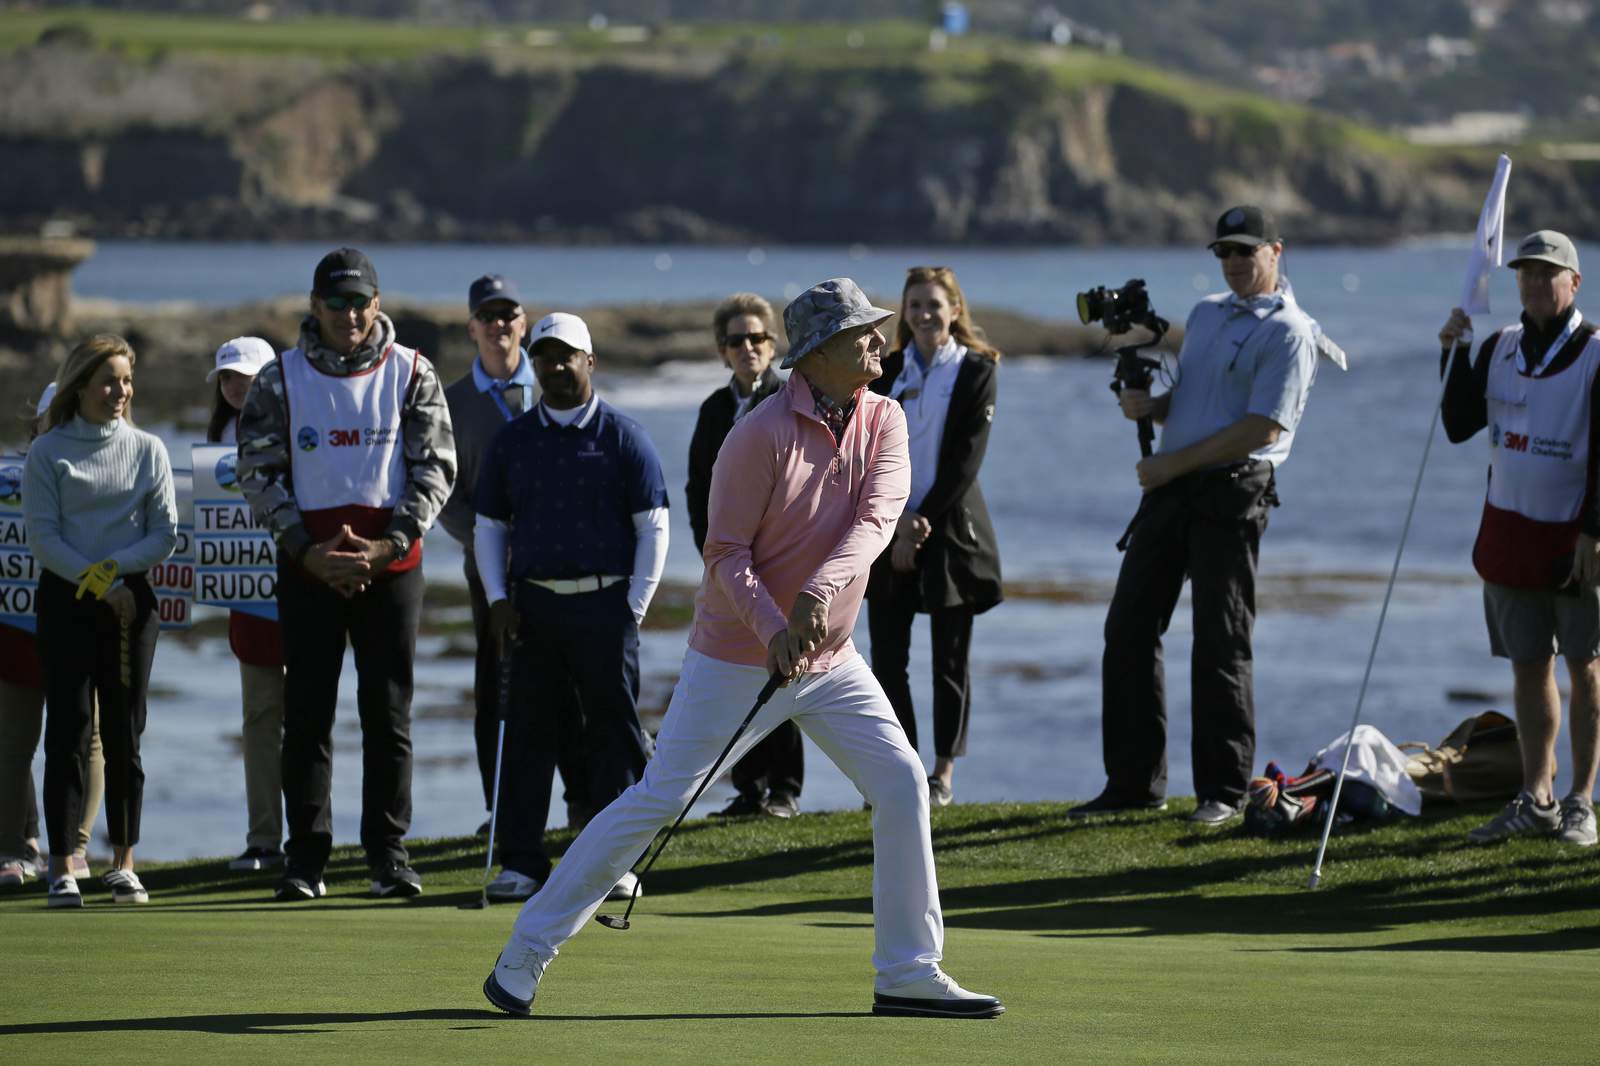 Pebble Beach for pros only this year because of COVID spike